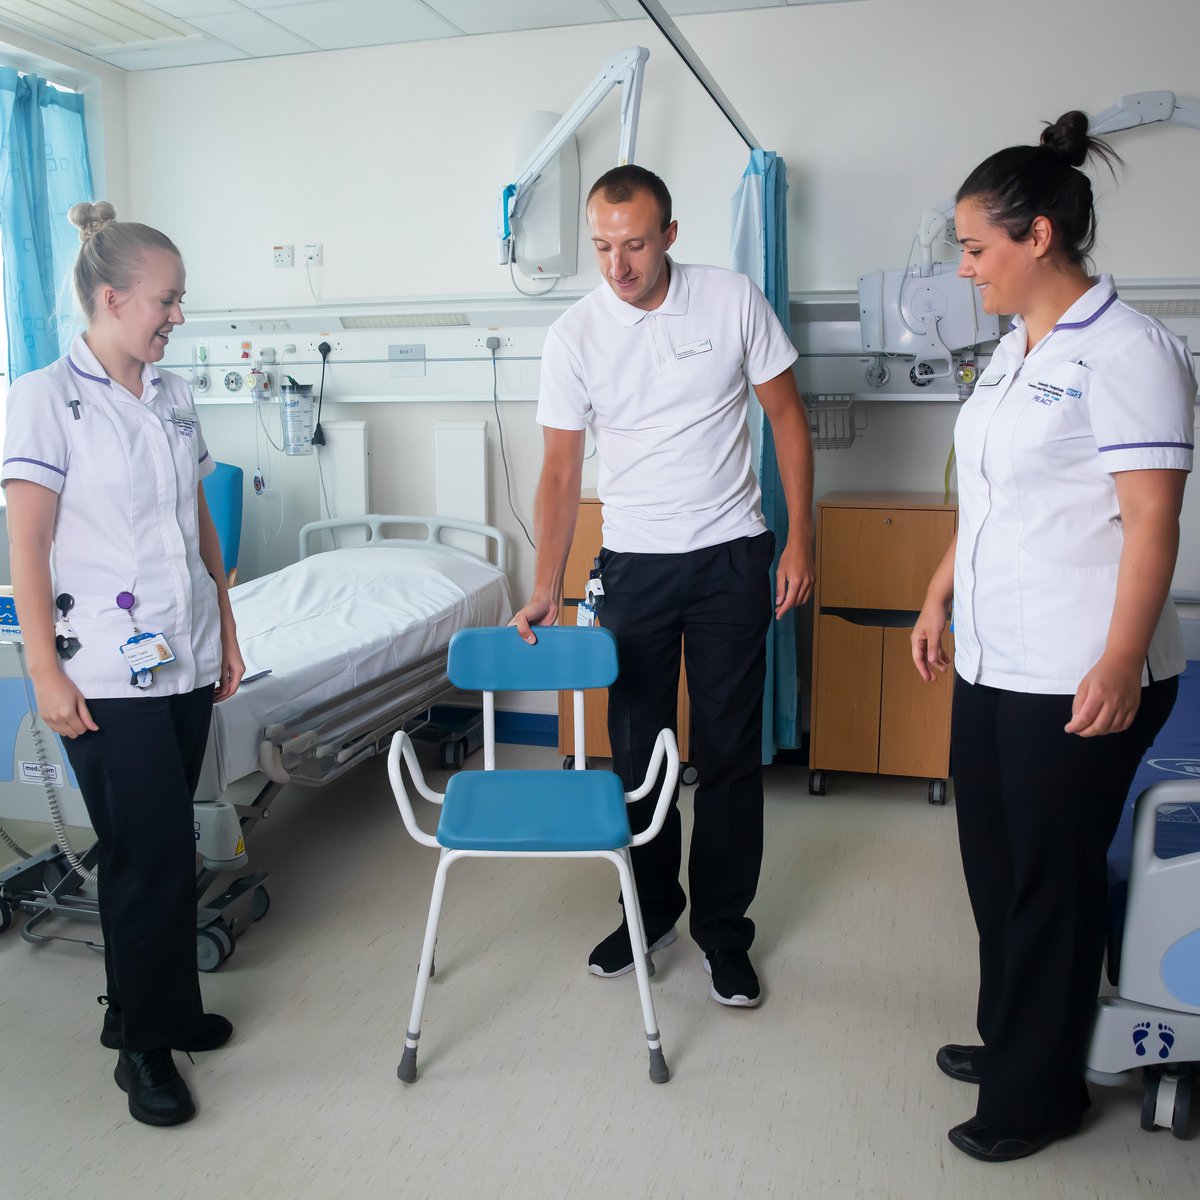 👀We are looking for Occupational Therapists for our rotation at UHCW NHS Trust. 💙The rotation offers a wide range of learning opportunities and experiences, to develop clinical skills across the patient pathway within the Acute setting. Apply via: jobs.uhcw.nhs.uk/job/v6085139